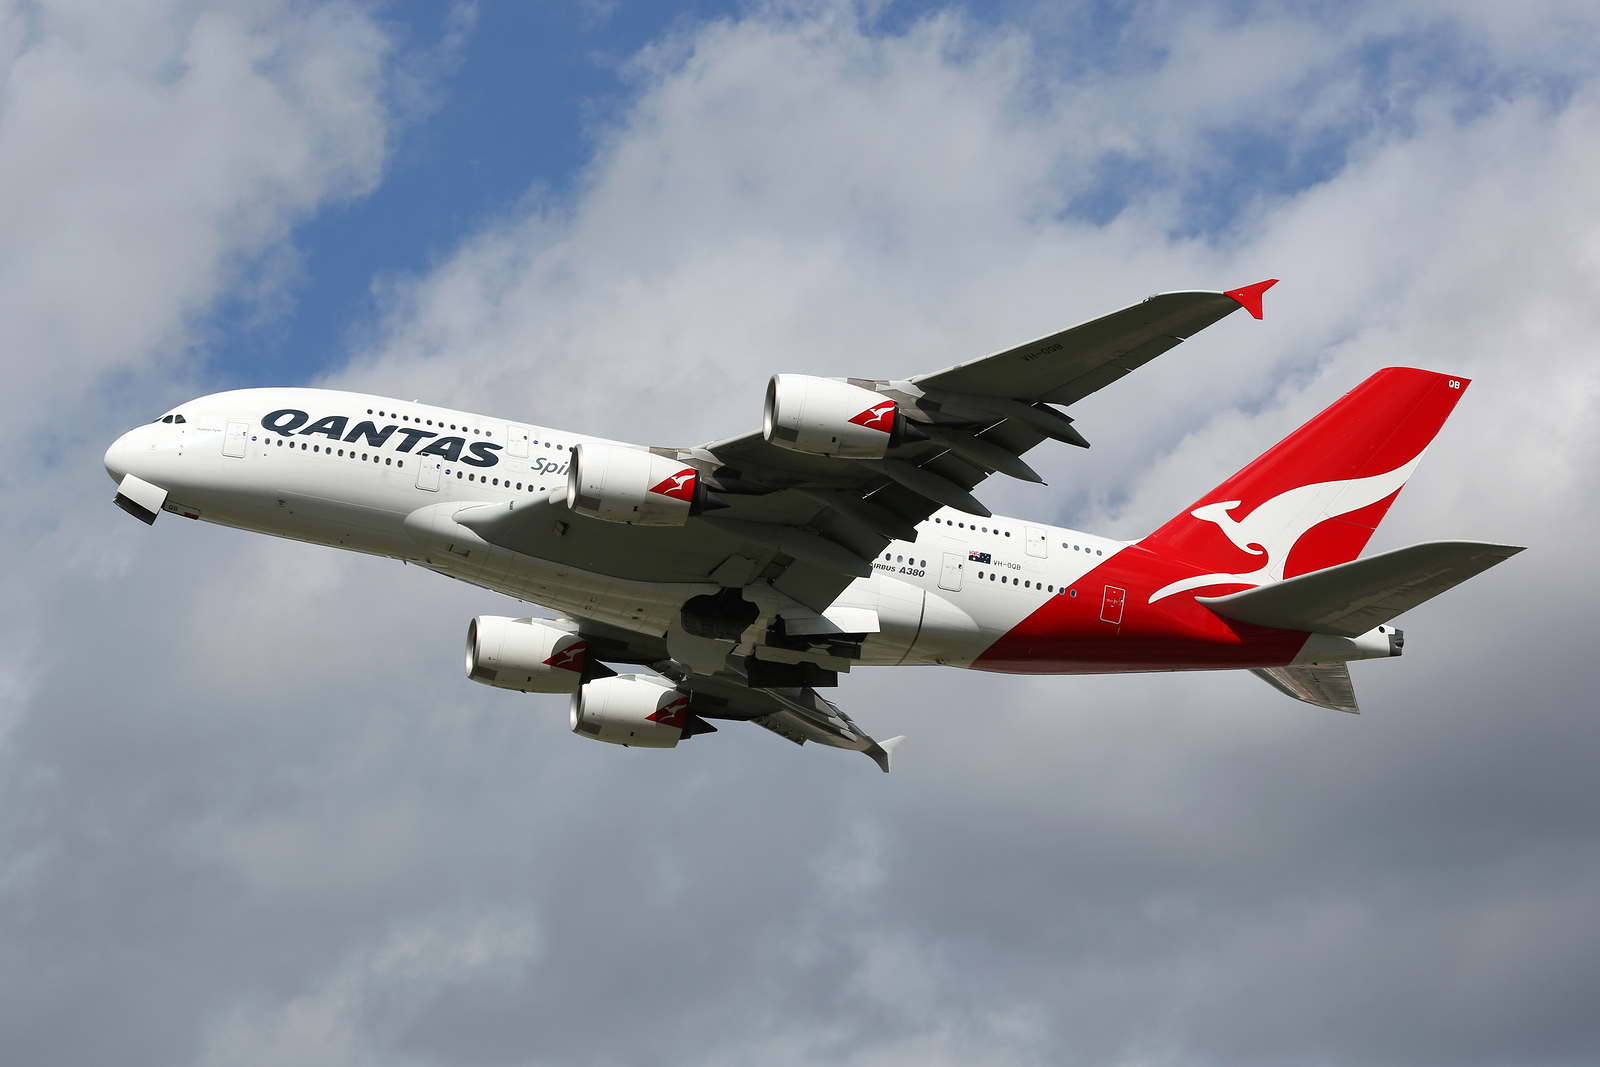 American And Qantas Stop Codesharing, Re-File Application To Cooperate On Routes